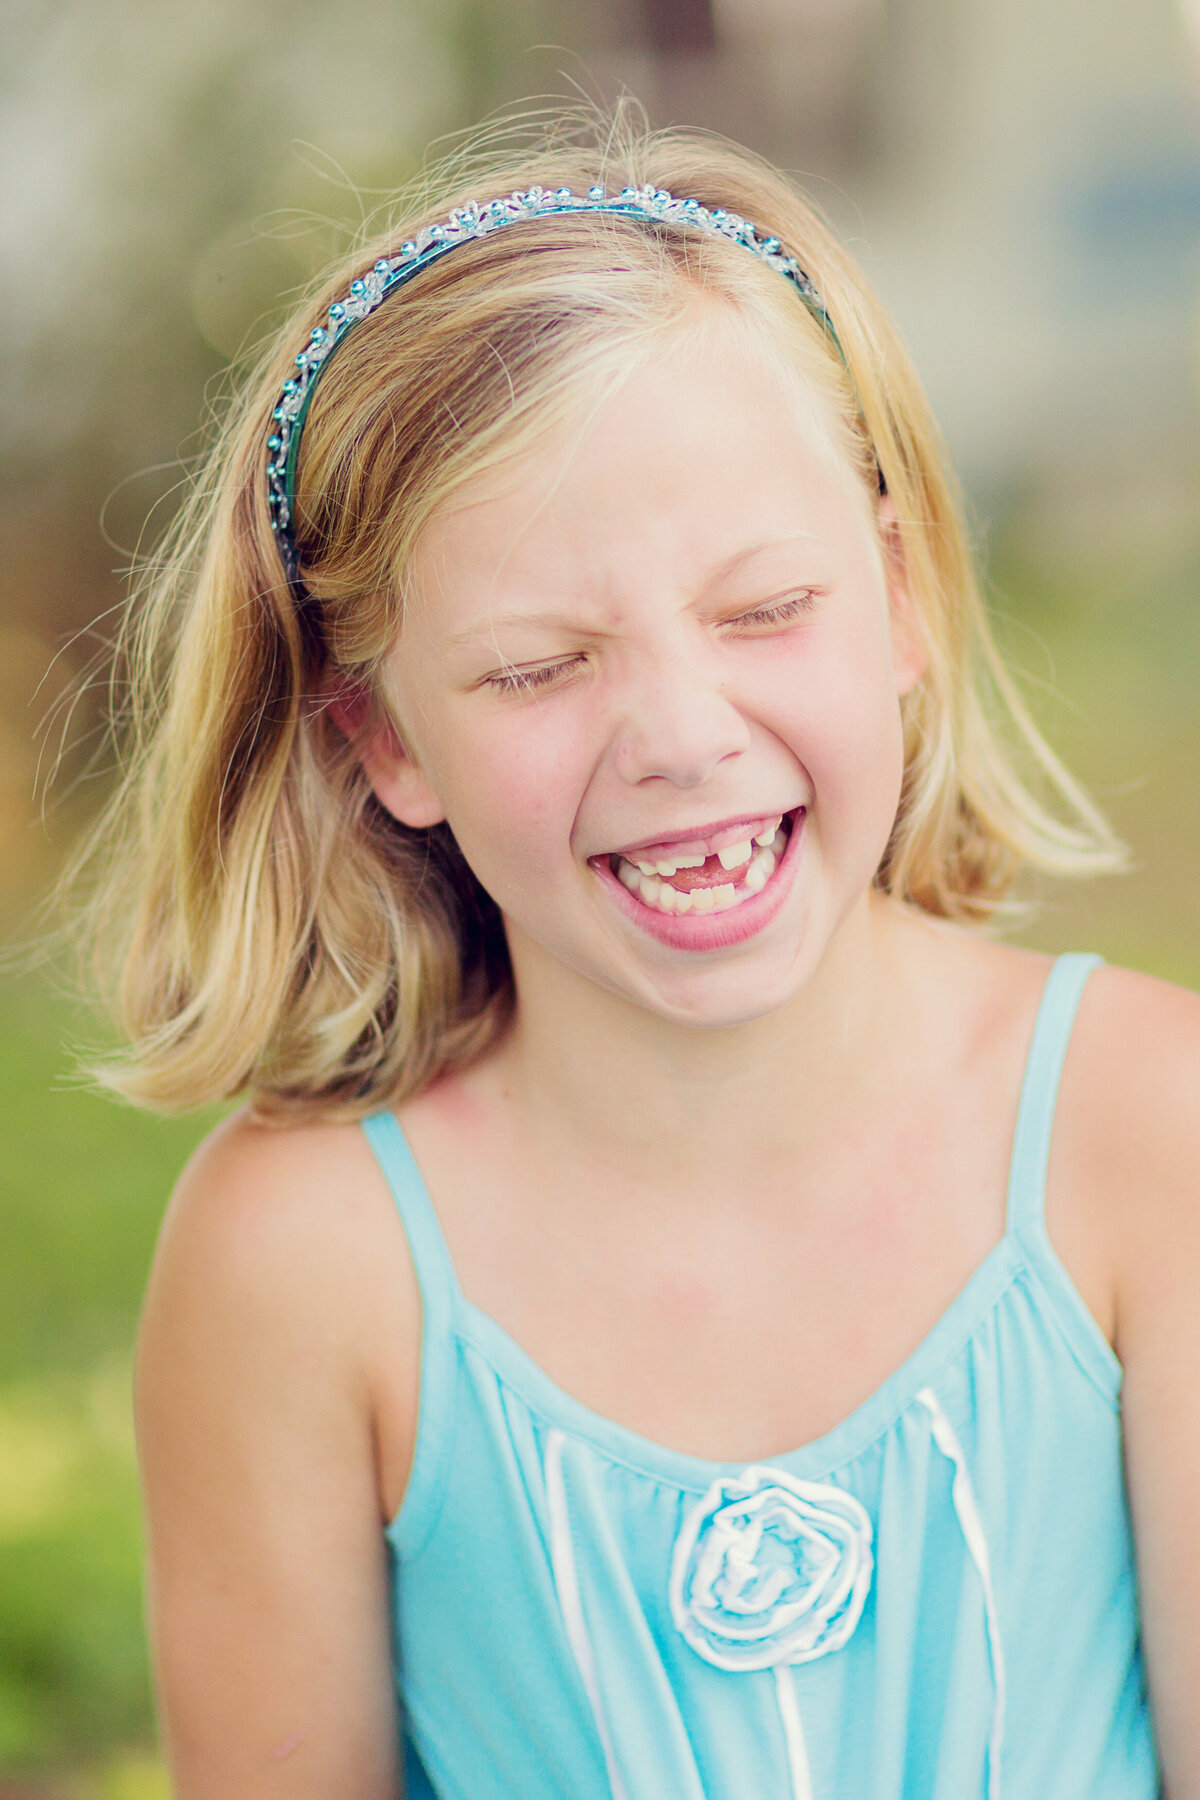 Girl giggles with eyes closed, showing off her crooked teeth coming in. She's wearing a light blue top and a matching headband.